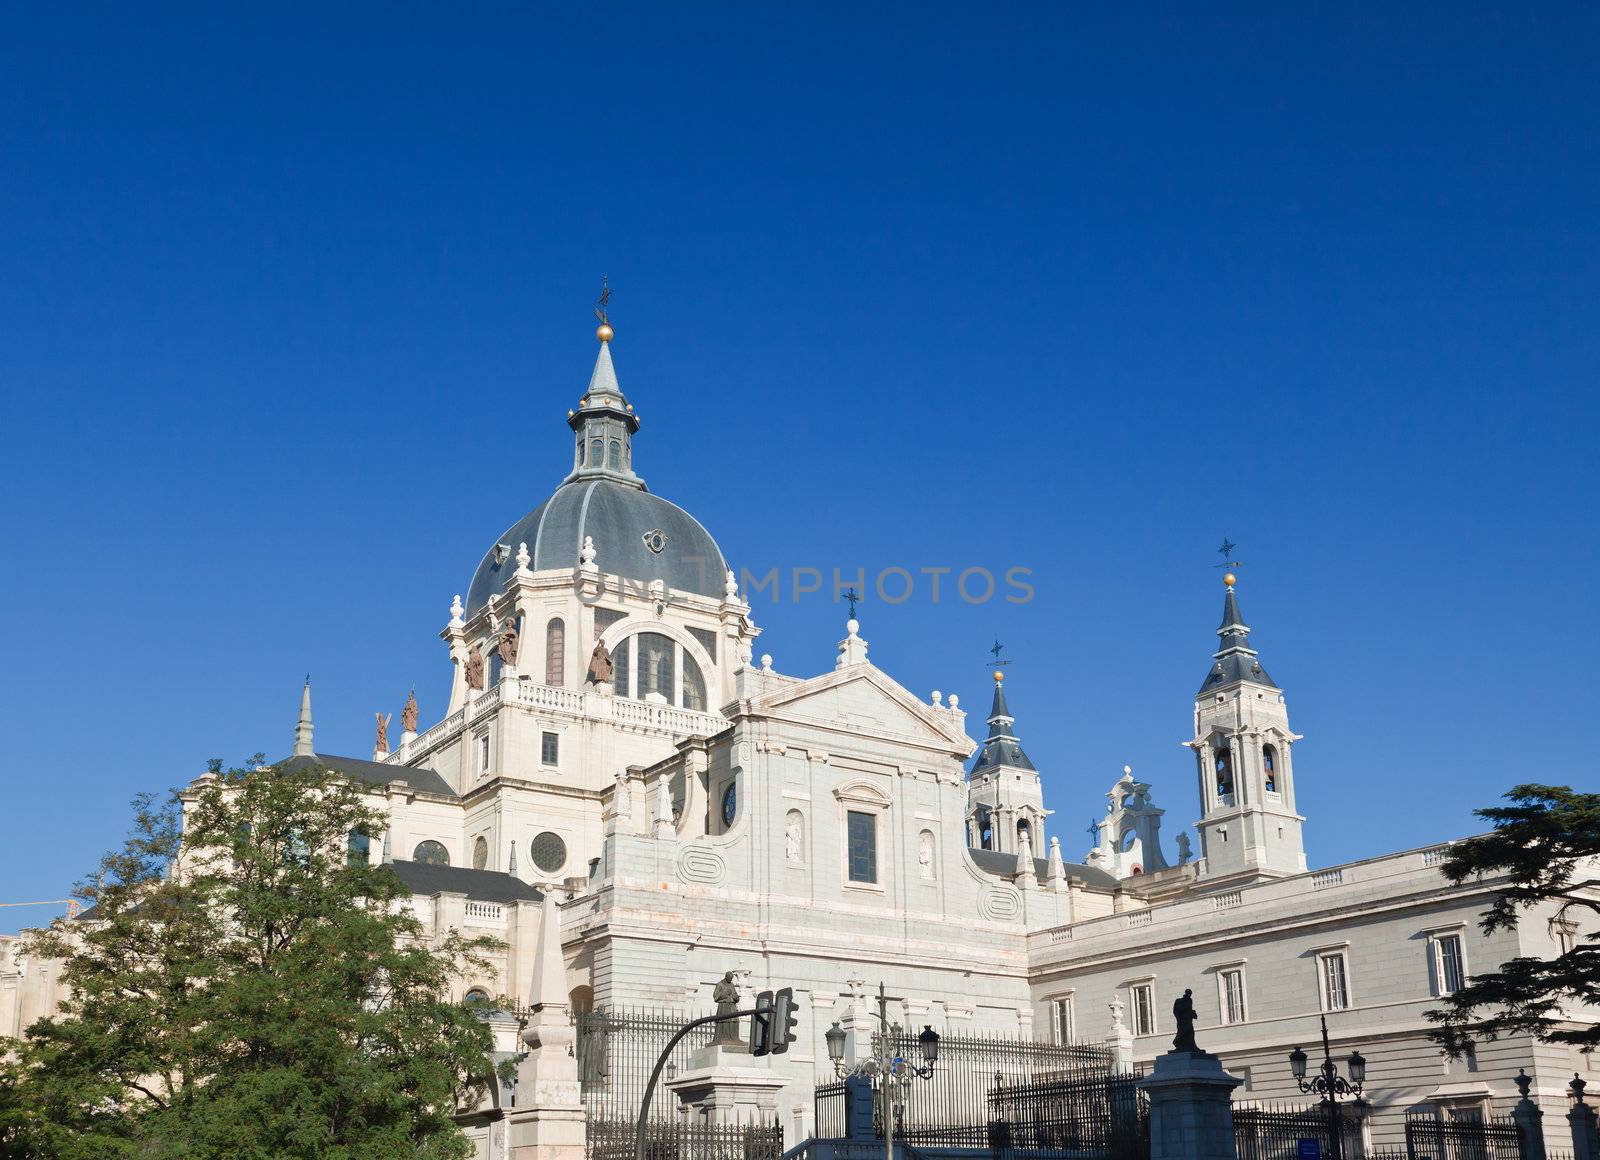 The Cathedral of Almudena in Madrid, Spain